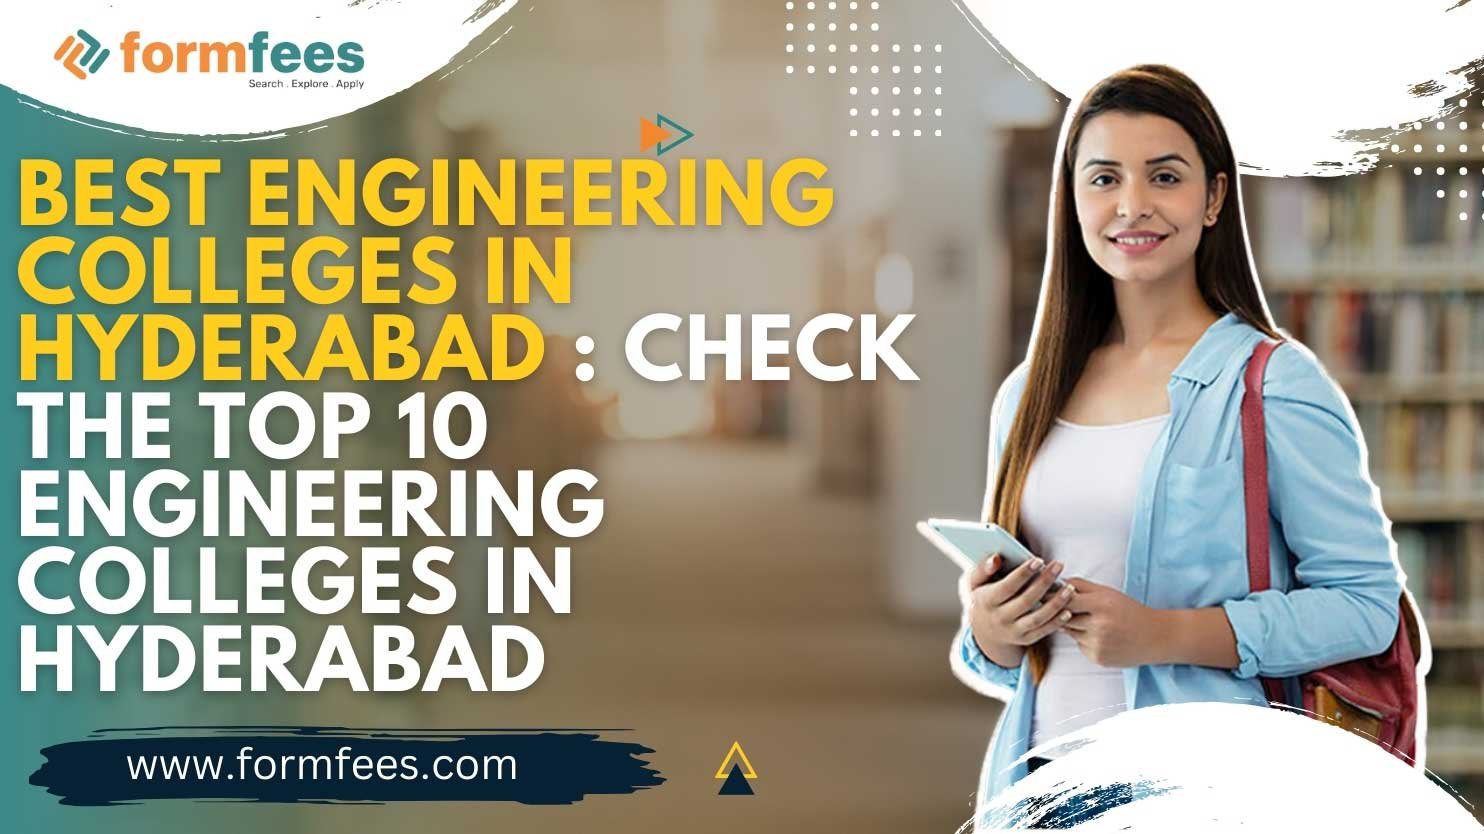 Best Engineering Colleges in Hyderabad : Check the Top 10 Engineering Colleges in Hyderabad